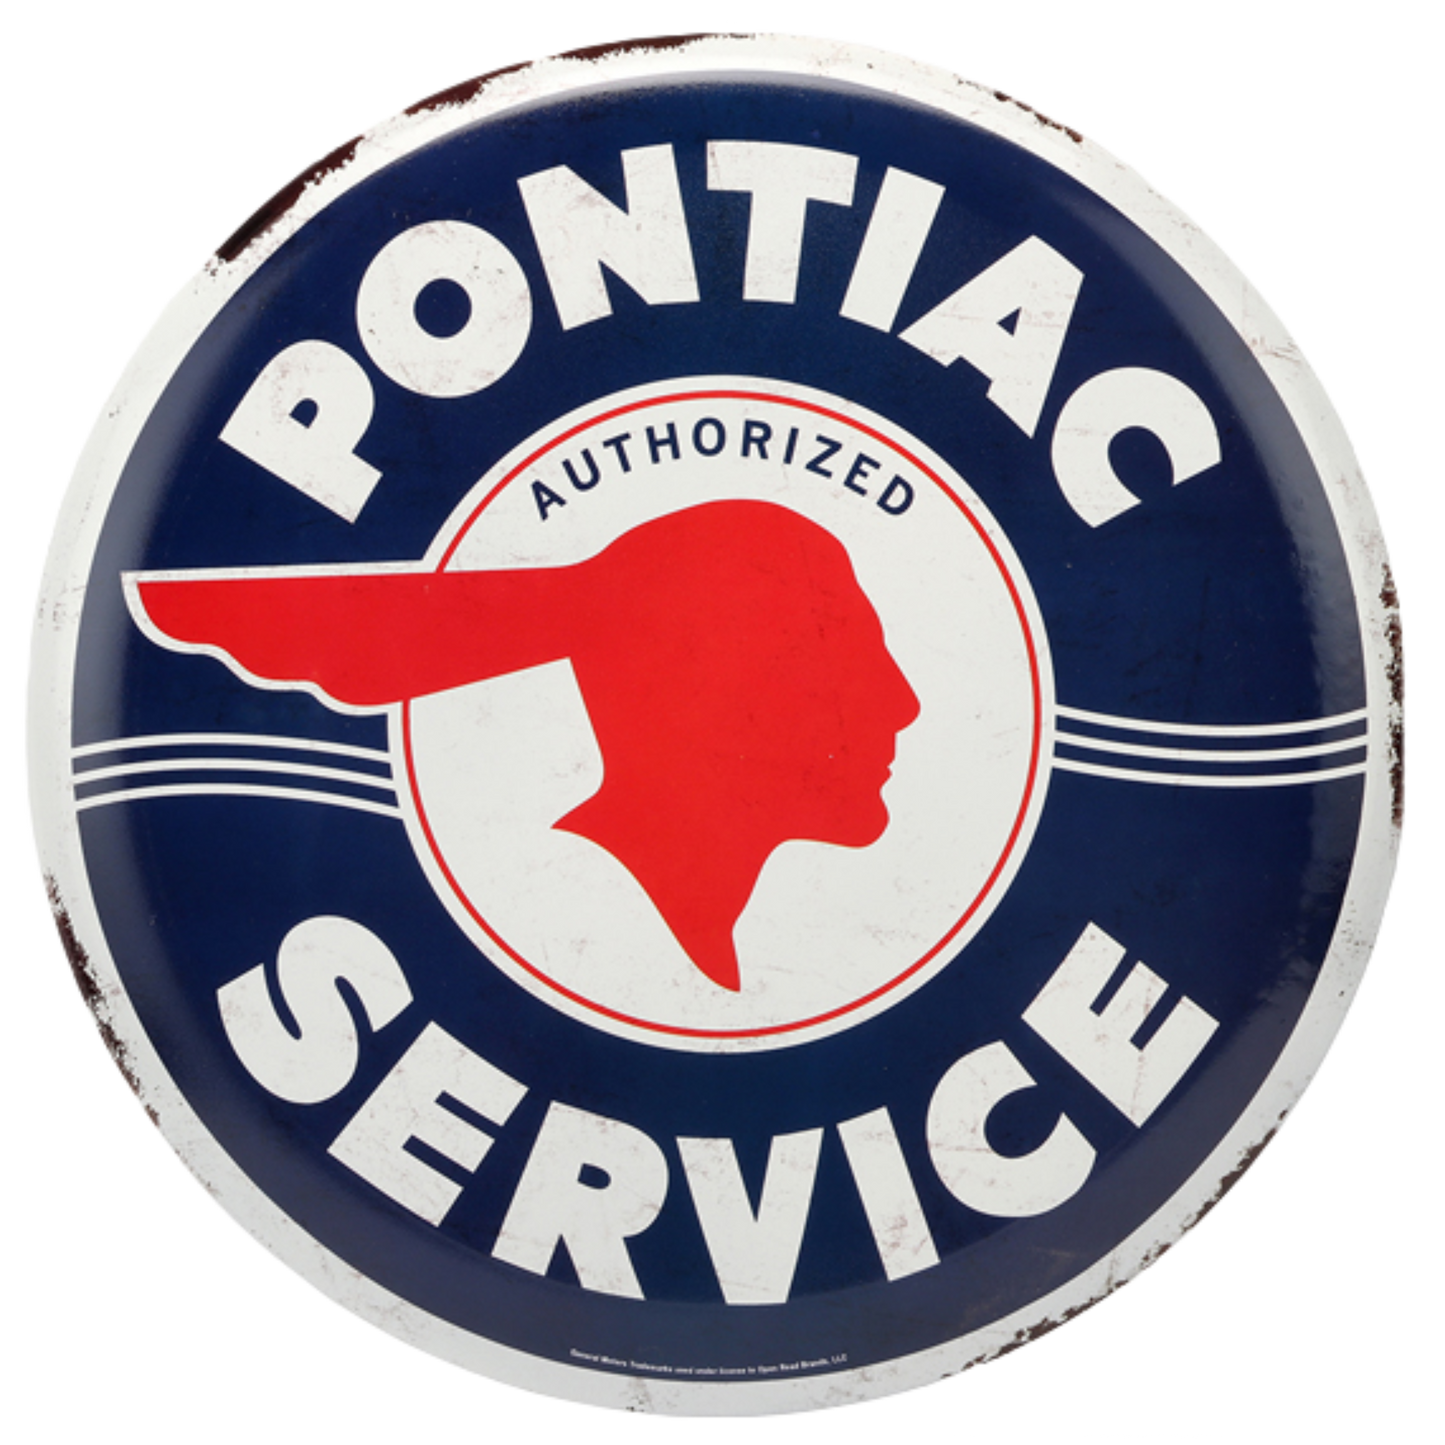 Round blue tin sign with "PONTIAC AUTHORIZED SERVICE" in white and a red silhouette of the Pontiac emblem.